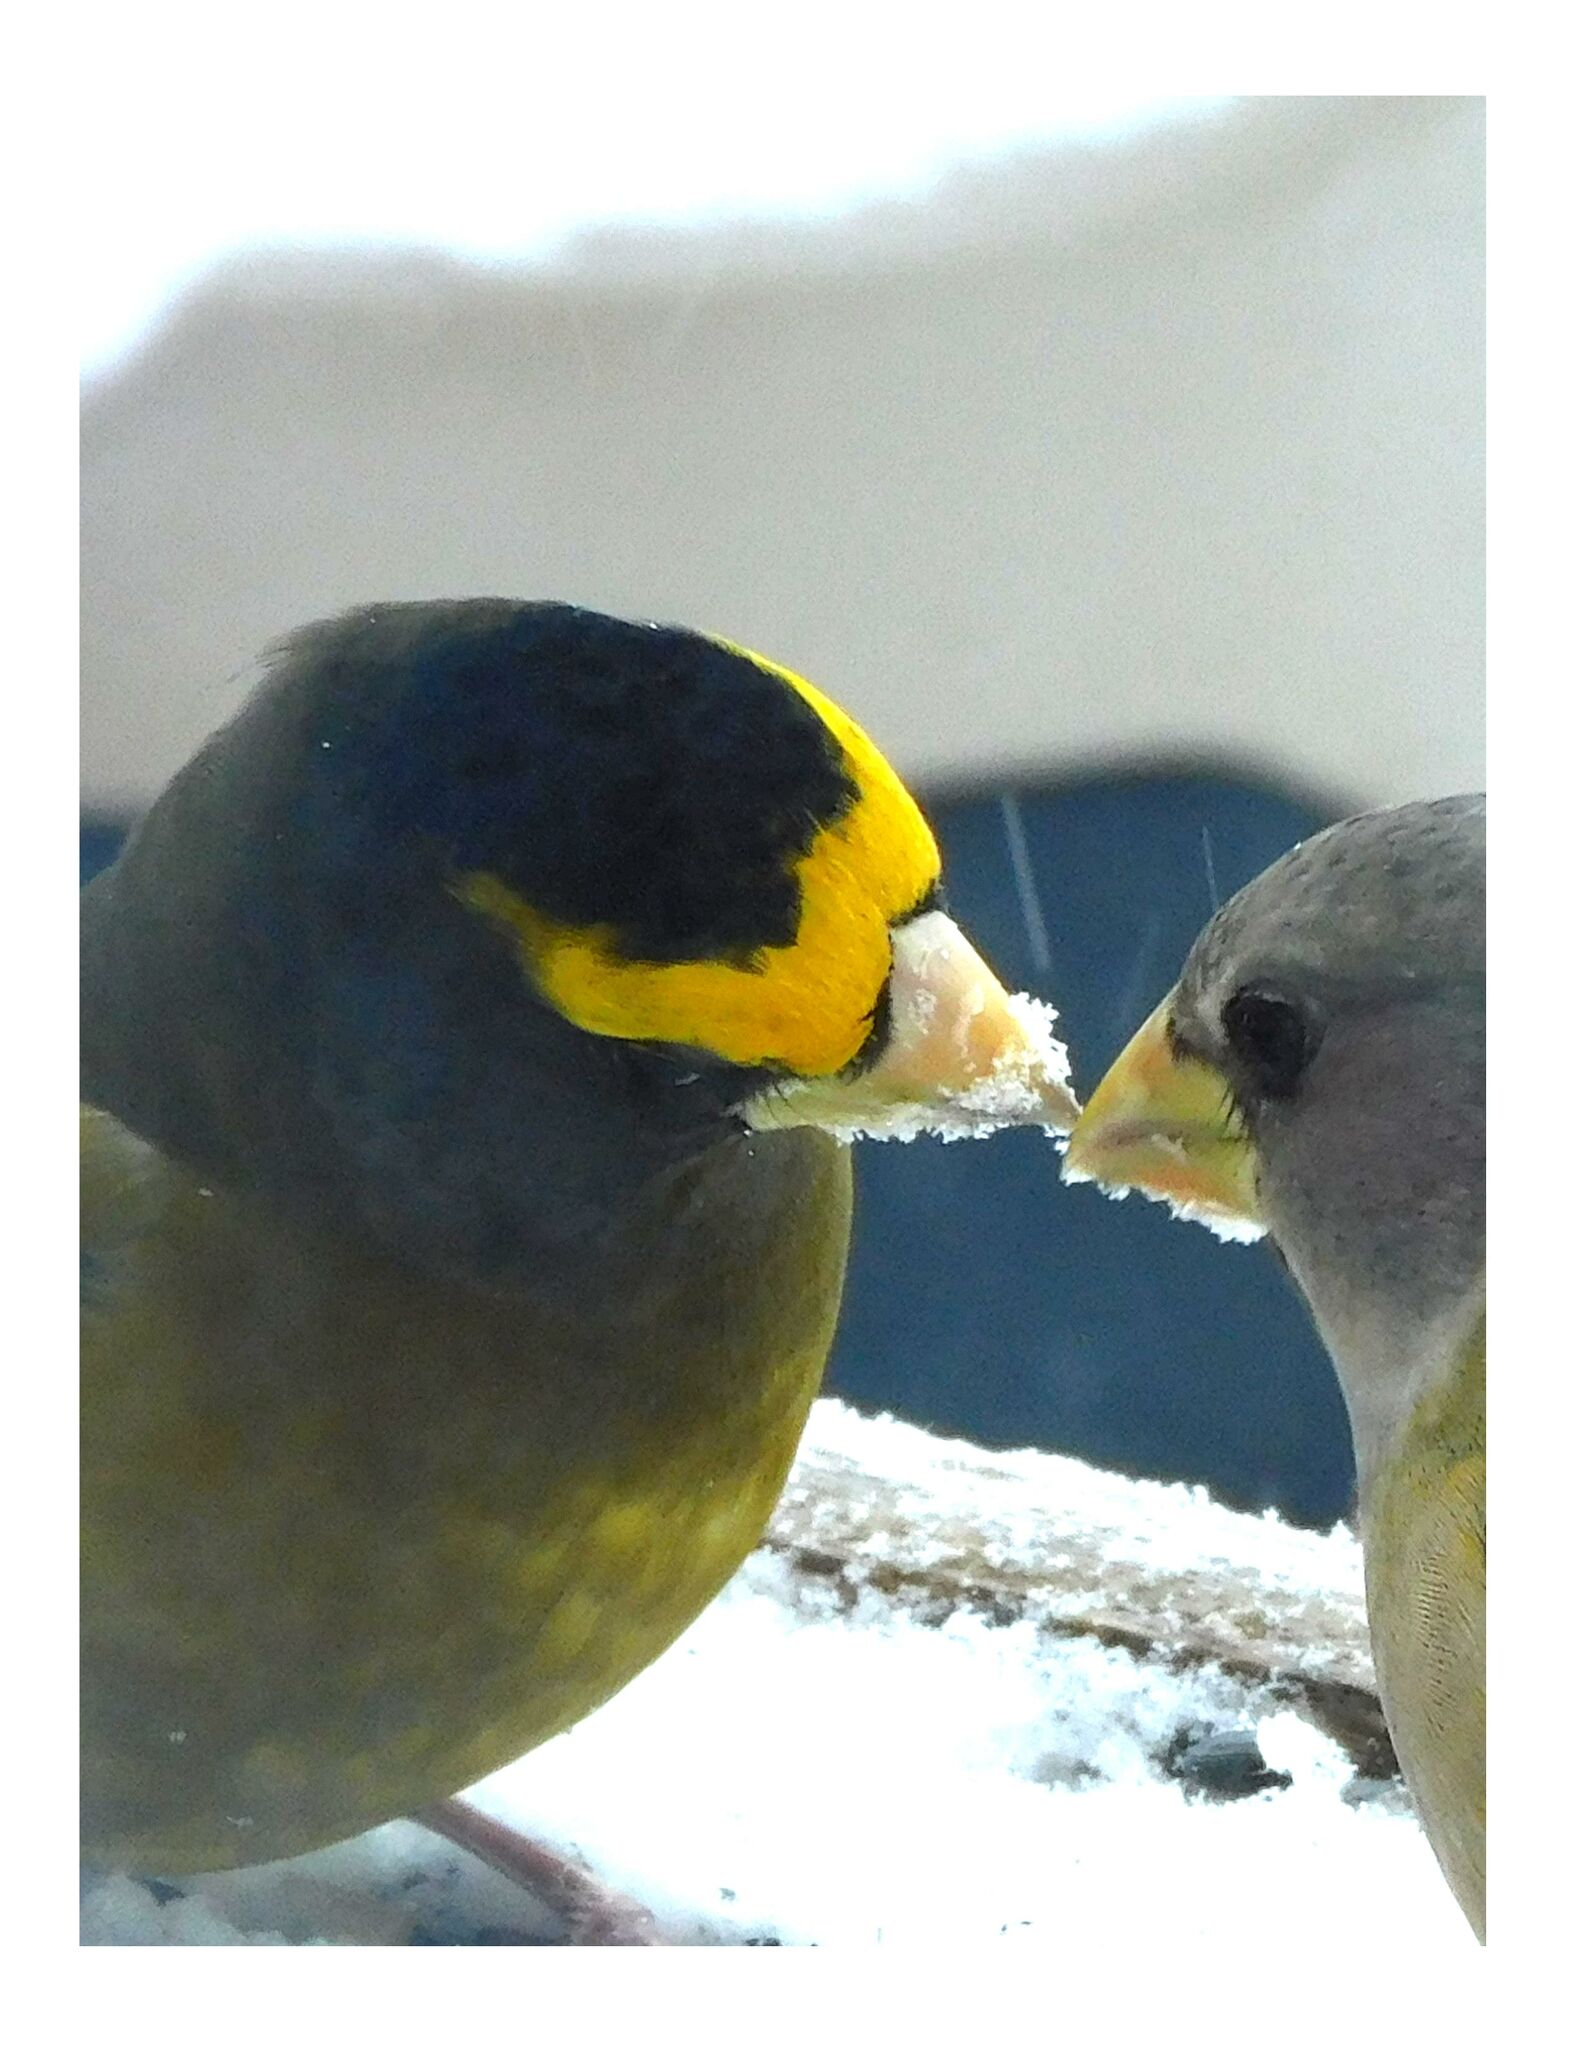 The Evening Grosbeak is a boldly colored bird that can lift your spirits